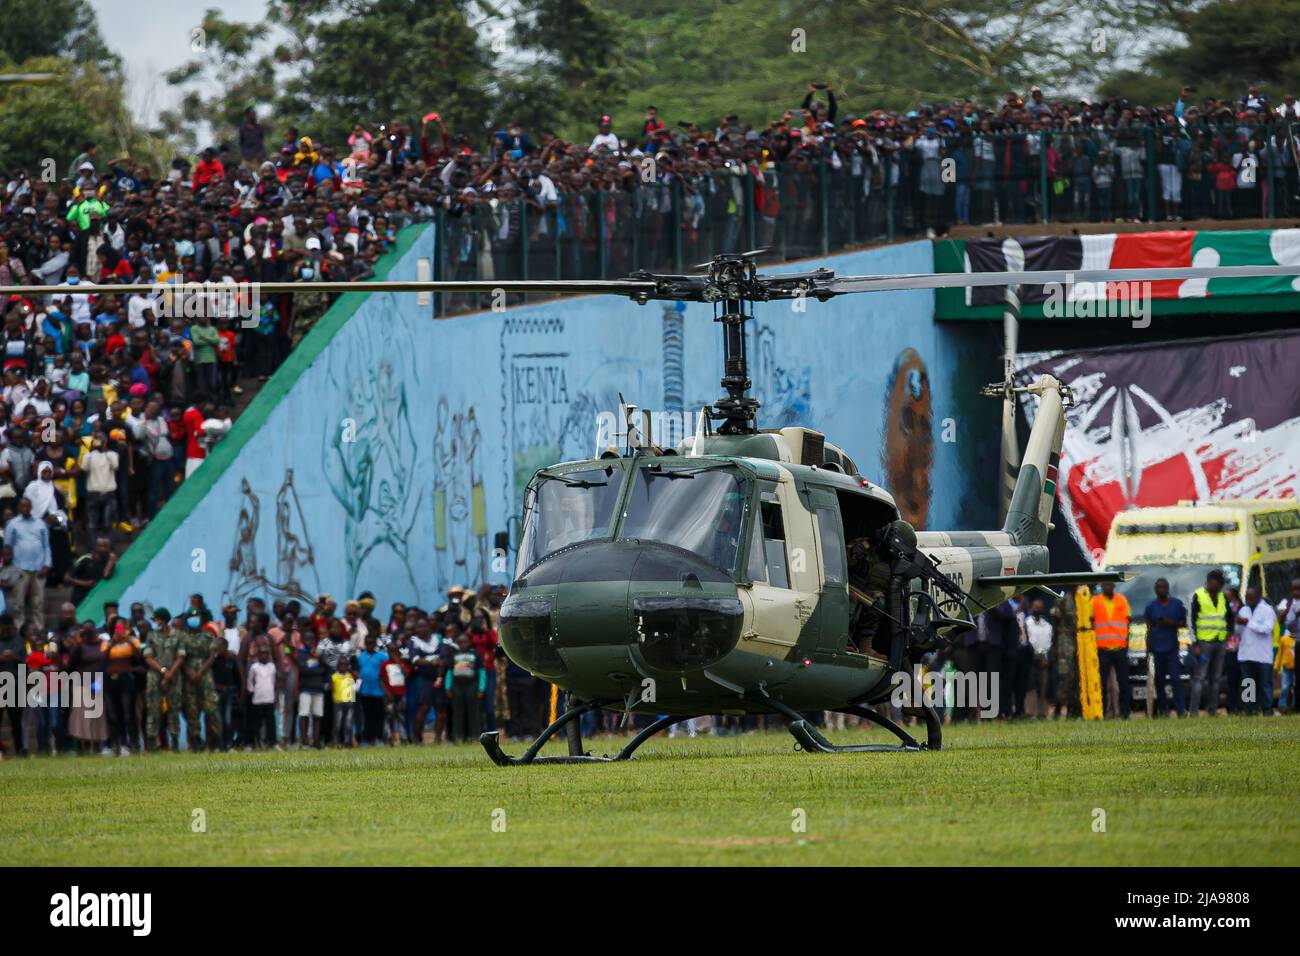 Nairobi, Kenya. 28th May, 2022. Kenyans turn up in large numbers at the Kenya Defence Forces Air Show at the Uhuru Gardens National Monument and Museum. The free Air Show was a forerunner of commissioning the Uhuru Gardens National Monument and Museum. It was led by Kenya Air Force and included the Kenya wildlife services and civilian aerobatic and sky diving teams. The aim was to entertain and educate the public. (Photo by Boniface Muthoni/SOPA Images/Sipa USA) Credit: Sipa USA/Alamy Live News Stock Photo